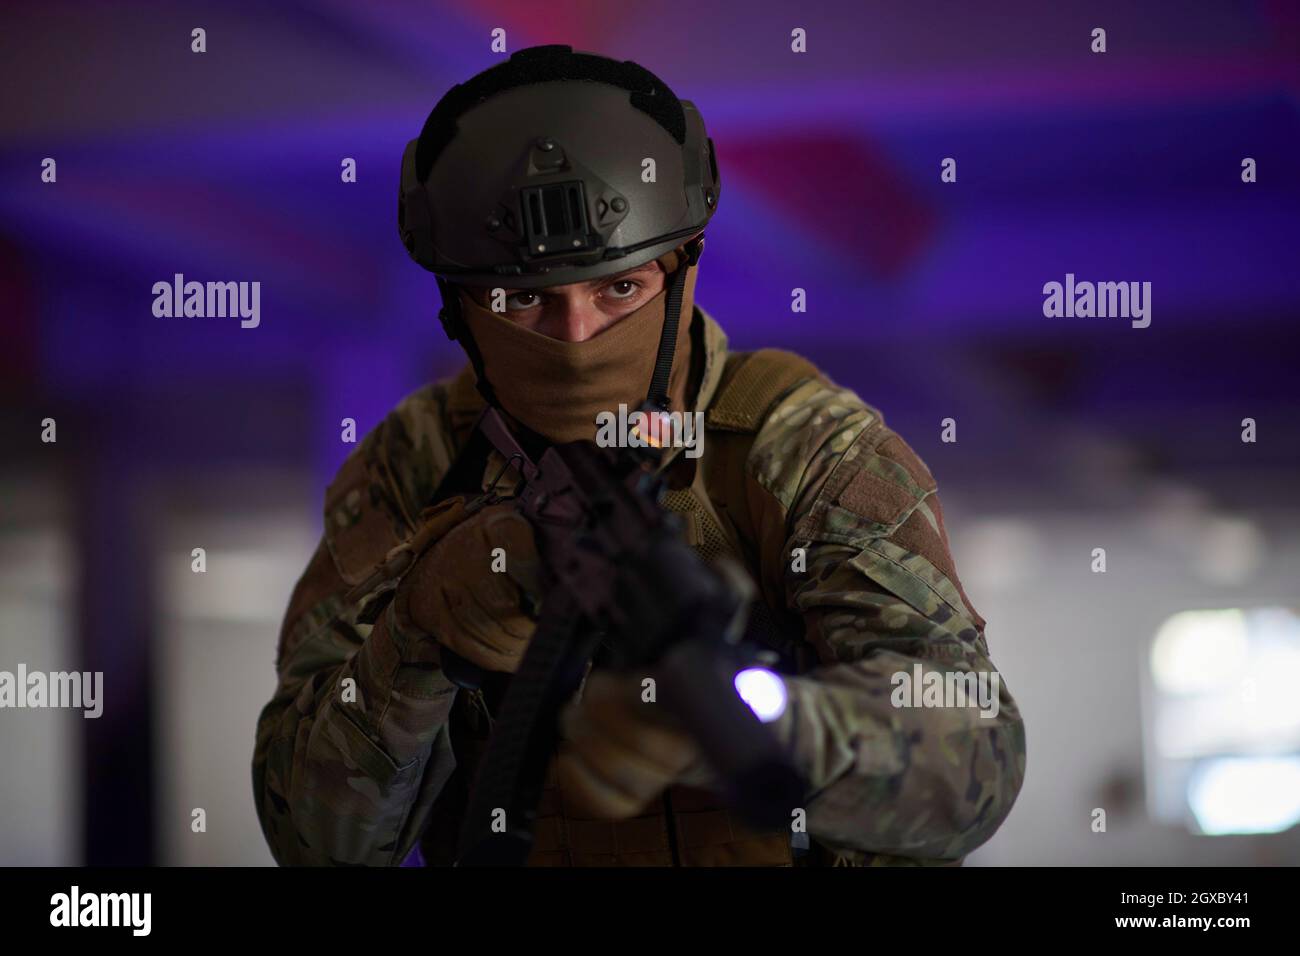 modern warfare soldier in urban environment  battlefield aiming on weapons and scanning for target Stock Photo